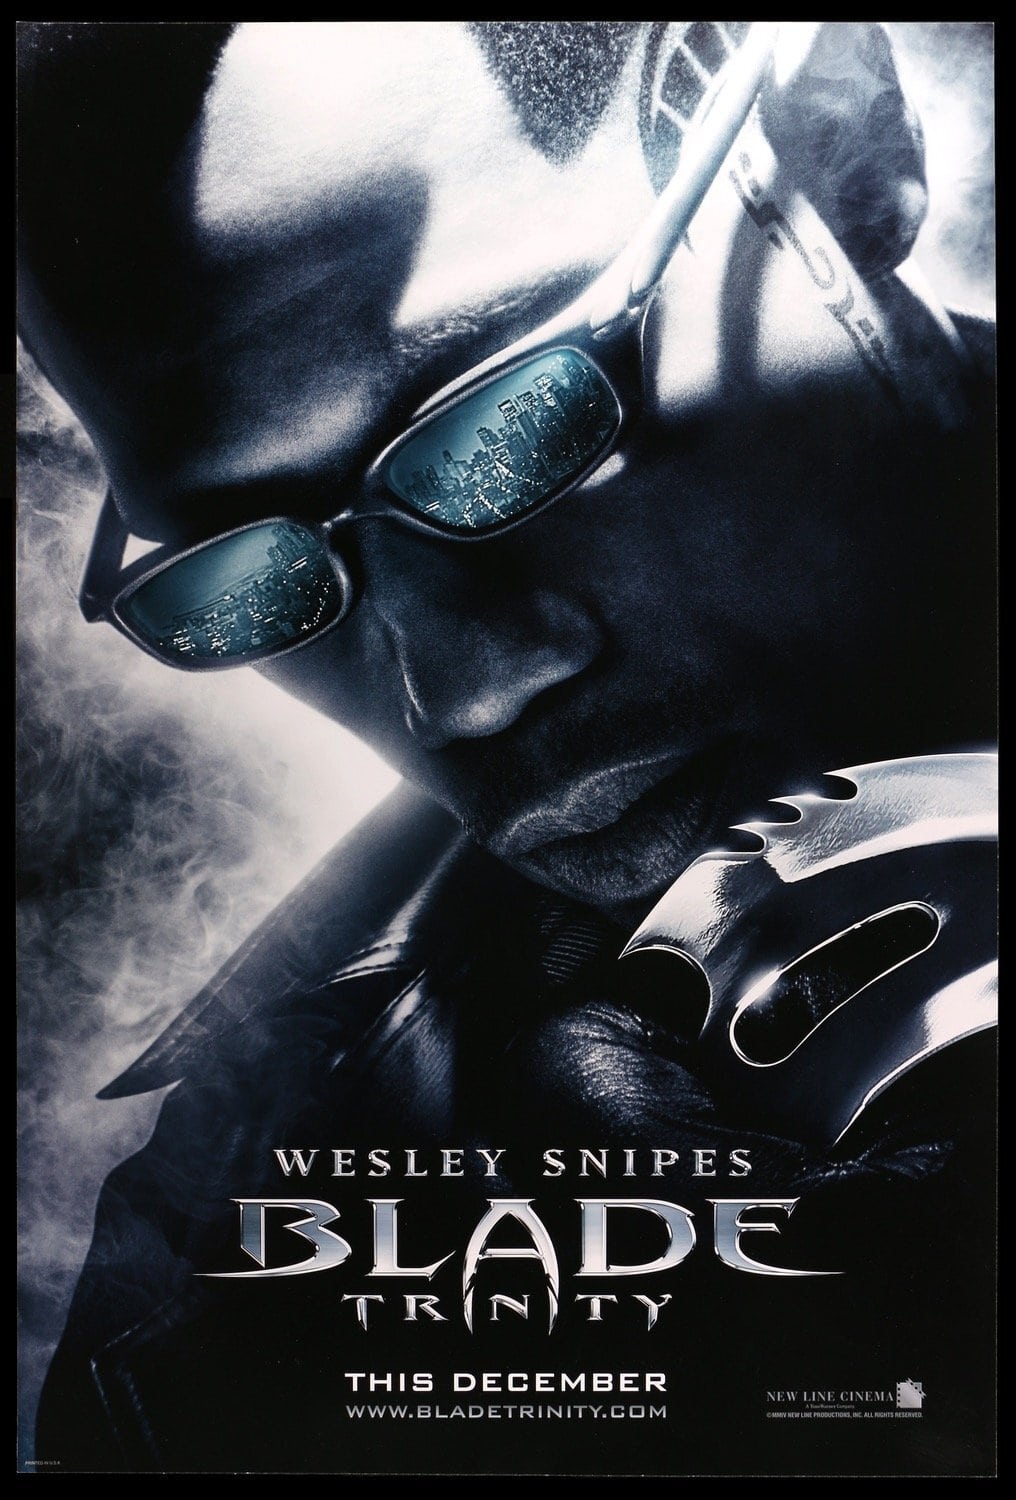 Nightstalkers, Daywalkers, and Familiars: Inside the World of 'Blade Trinity' (2005)